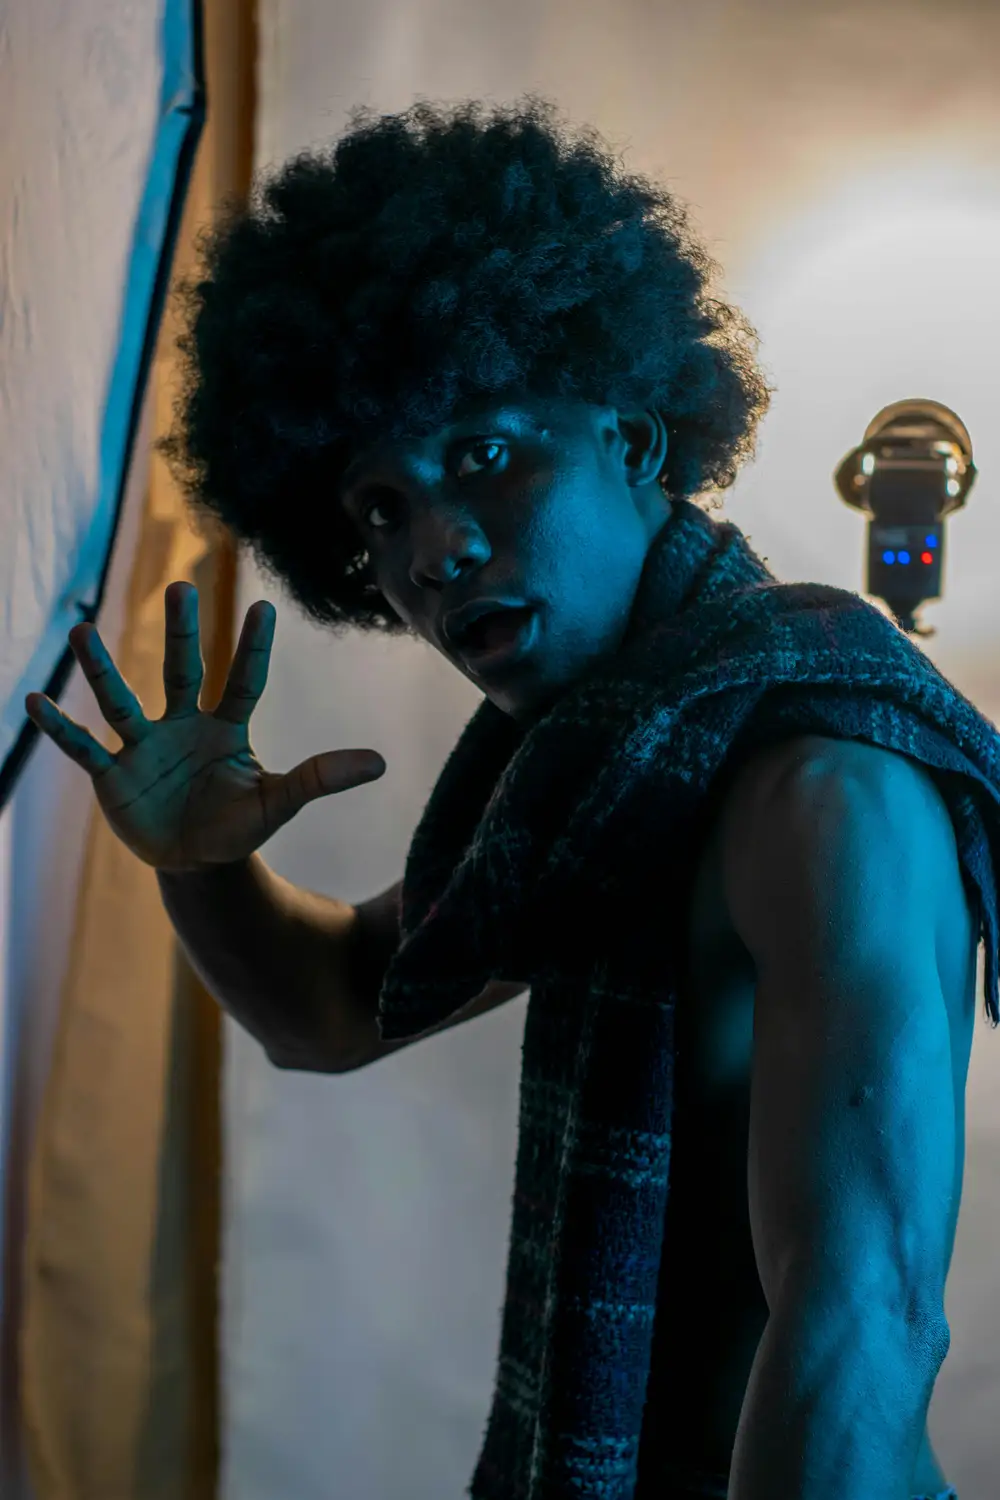 model on afro hairstyle raises his hands and opens his mouth